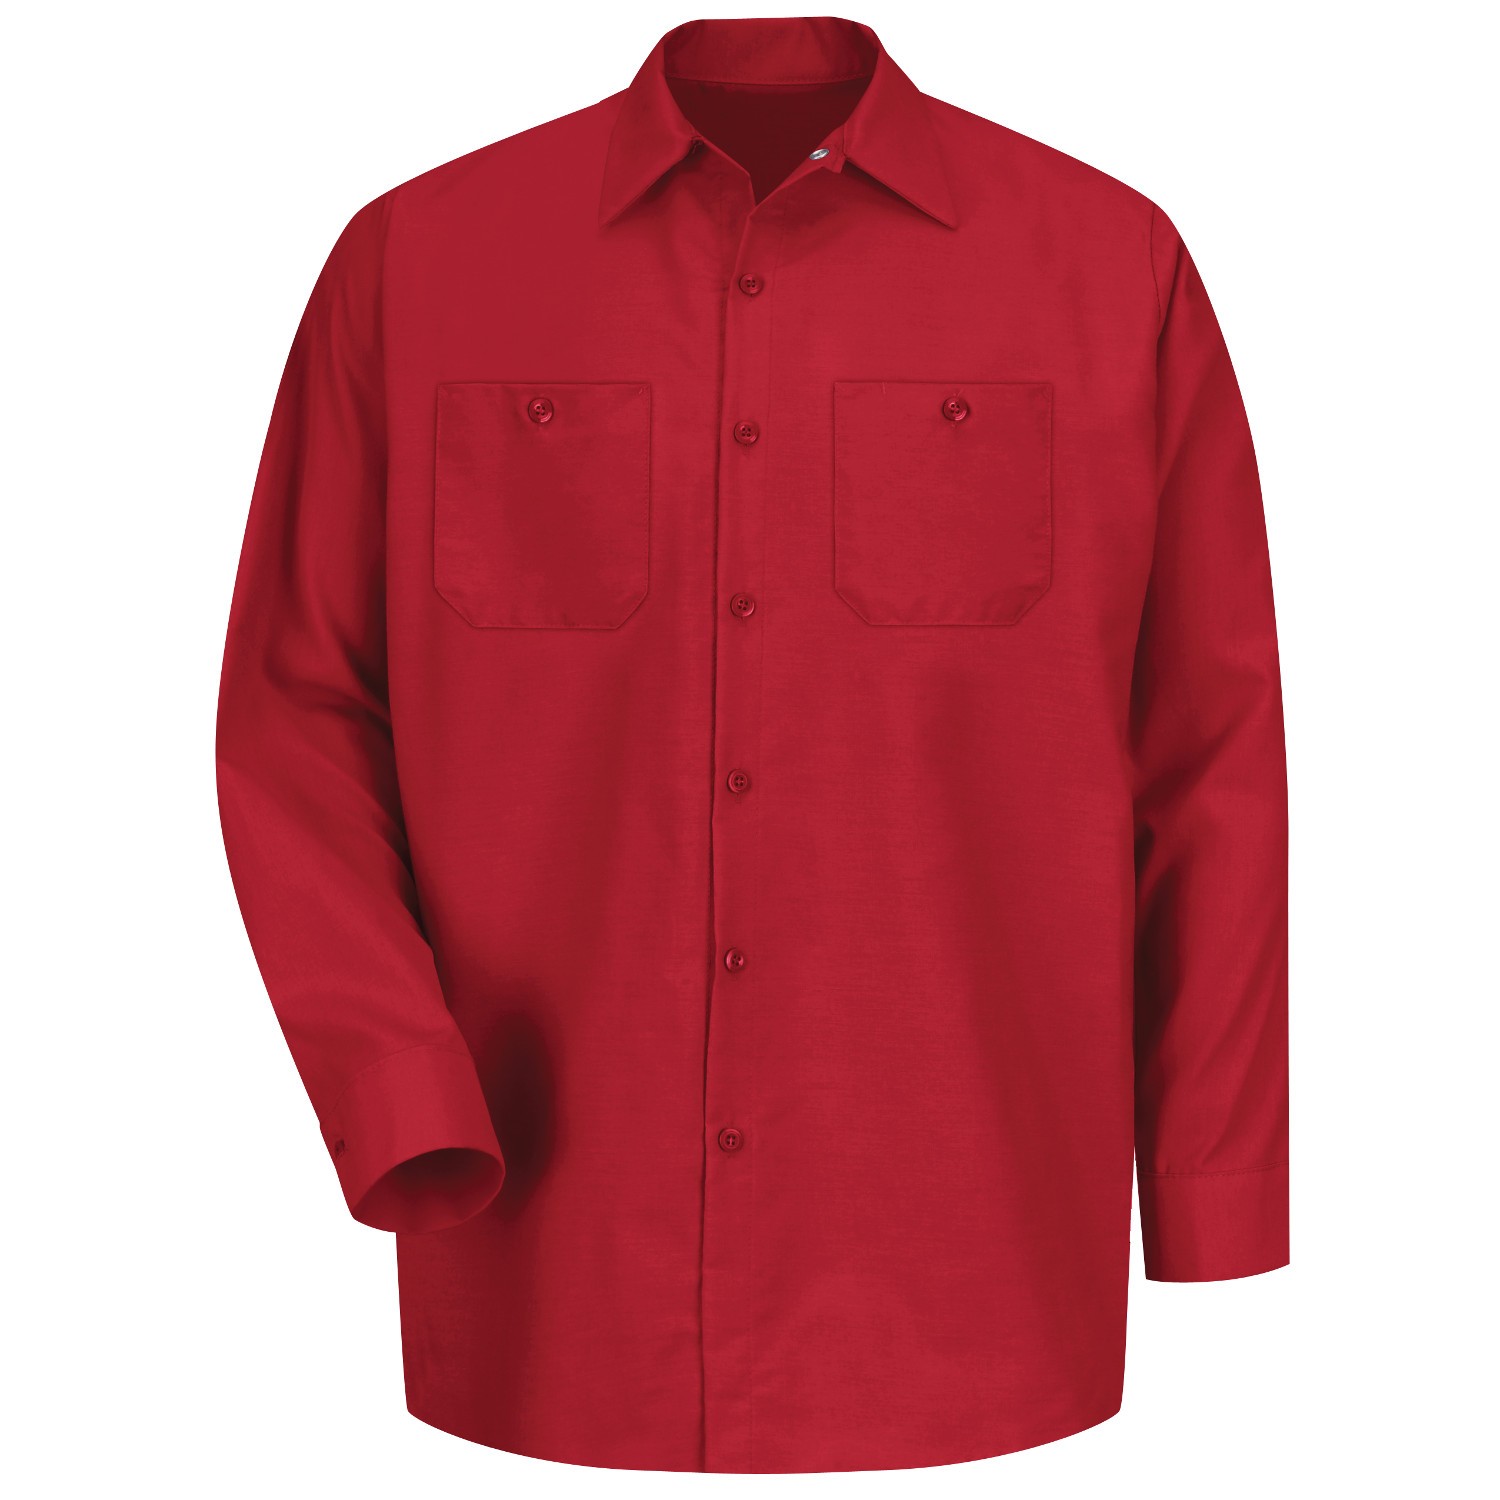 Red Kap Big and Tall Work Shirts in Big and Tall Occupational and